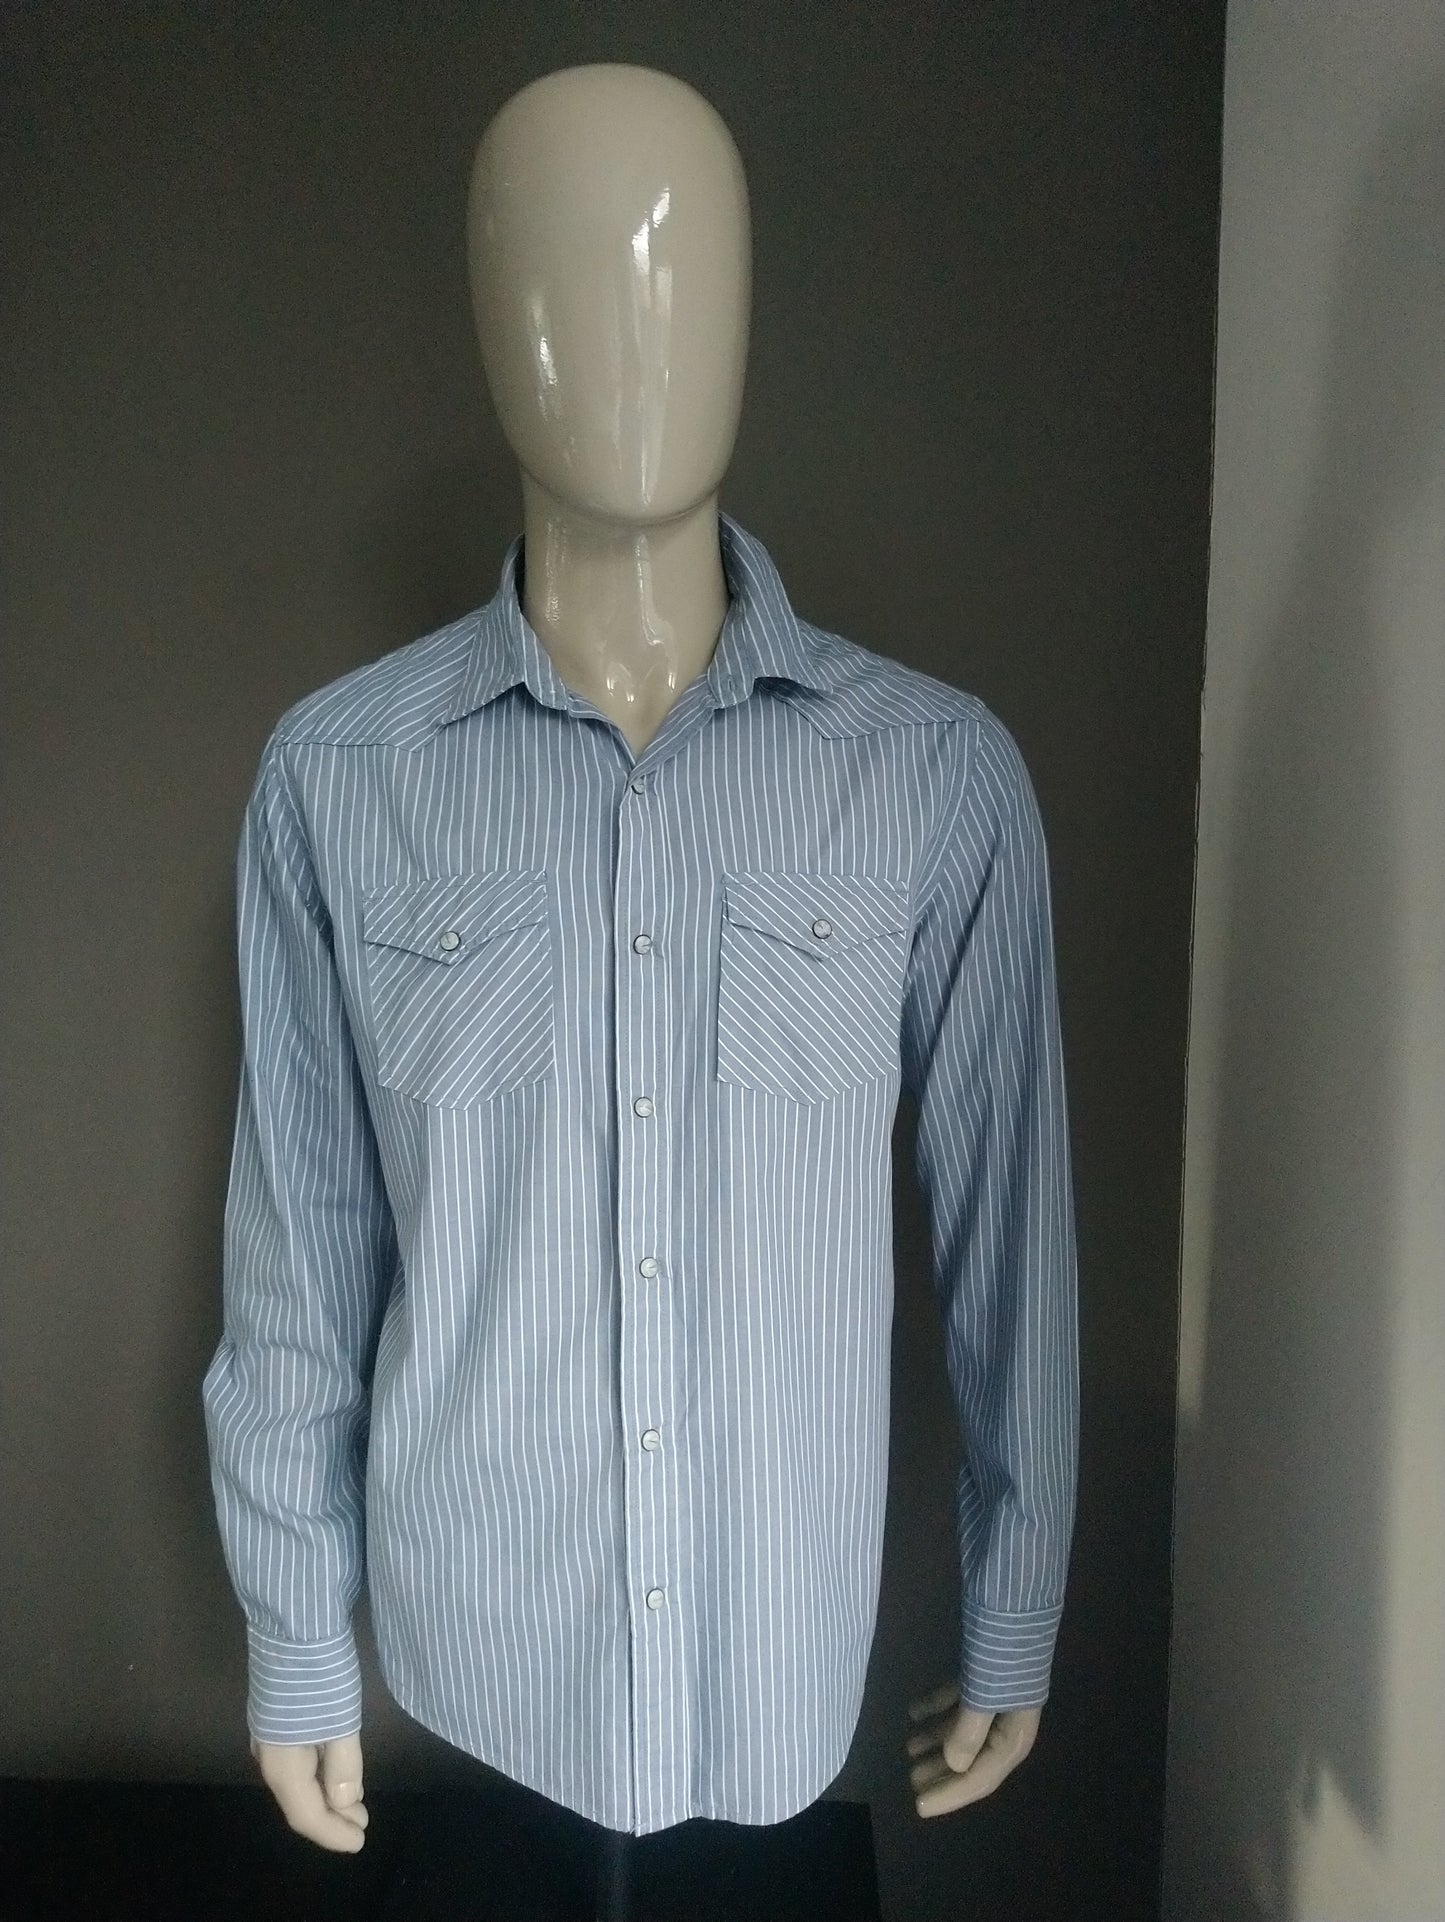 Old navy shirt with press studs. Gray white. Size XL